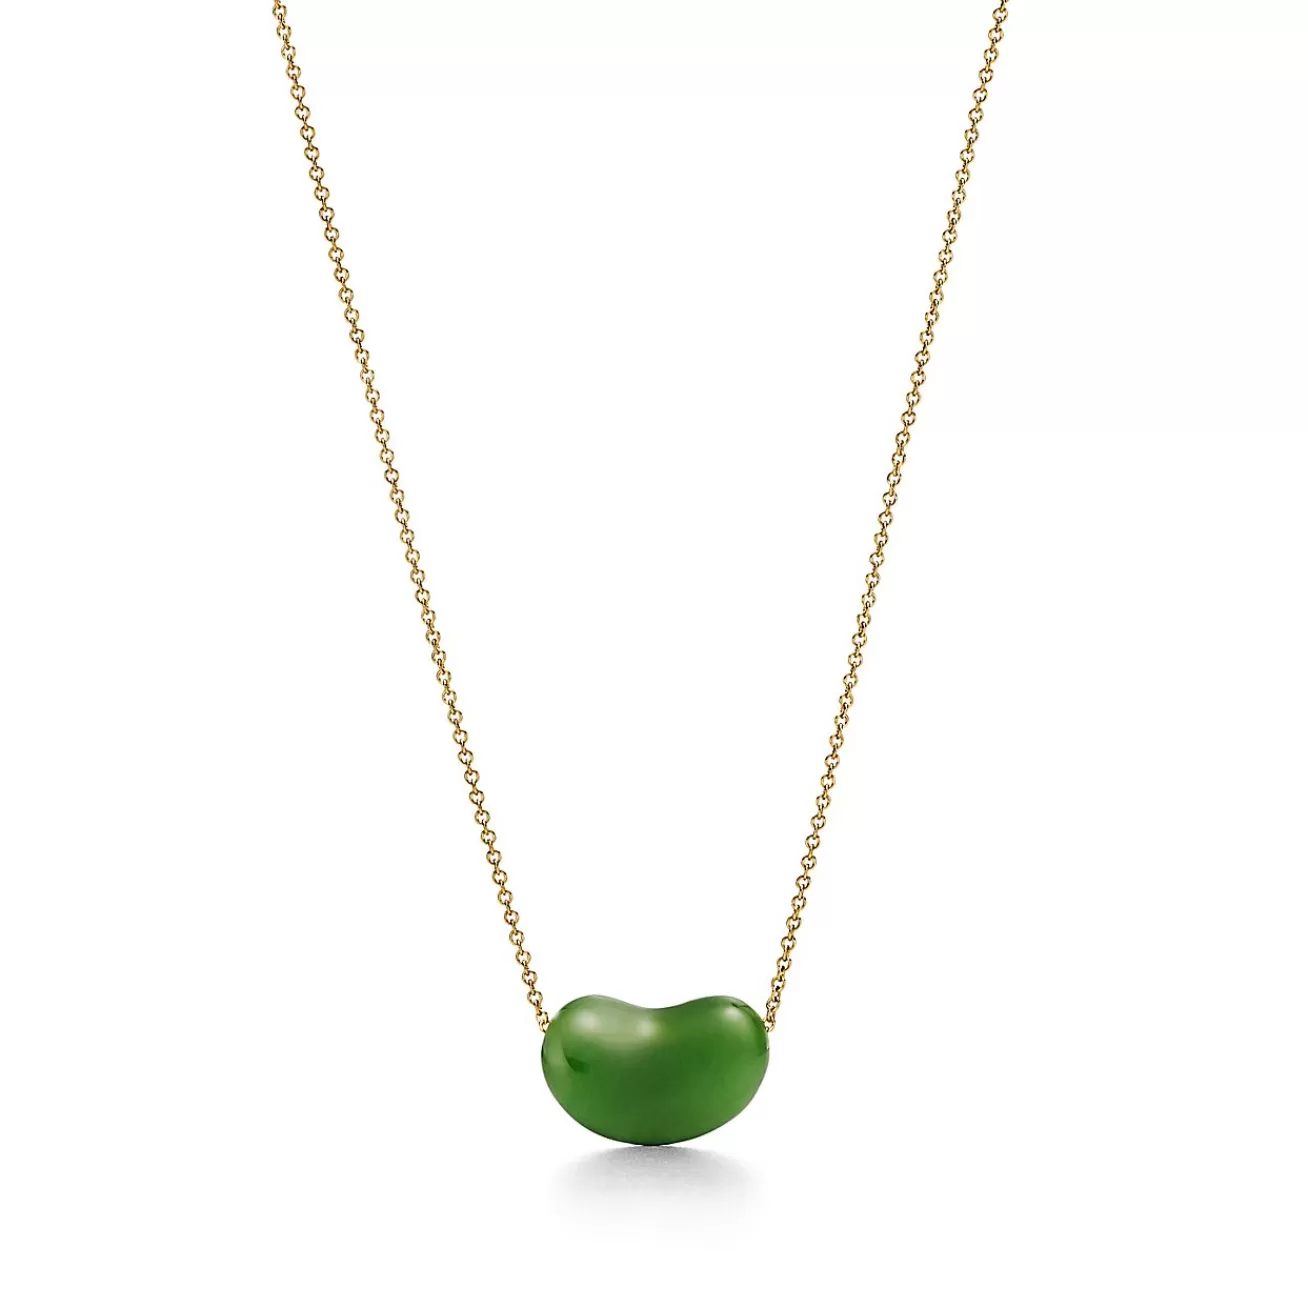 Tiffany & Co. Elsa Peretti® Bean® design Pendant in Yellow Gold with Green Jade, 18 mm | ^ Necklaces & Pendants | Gold Jewelry